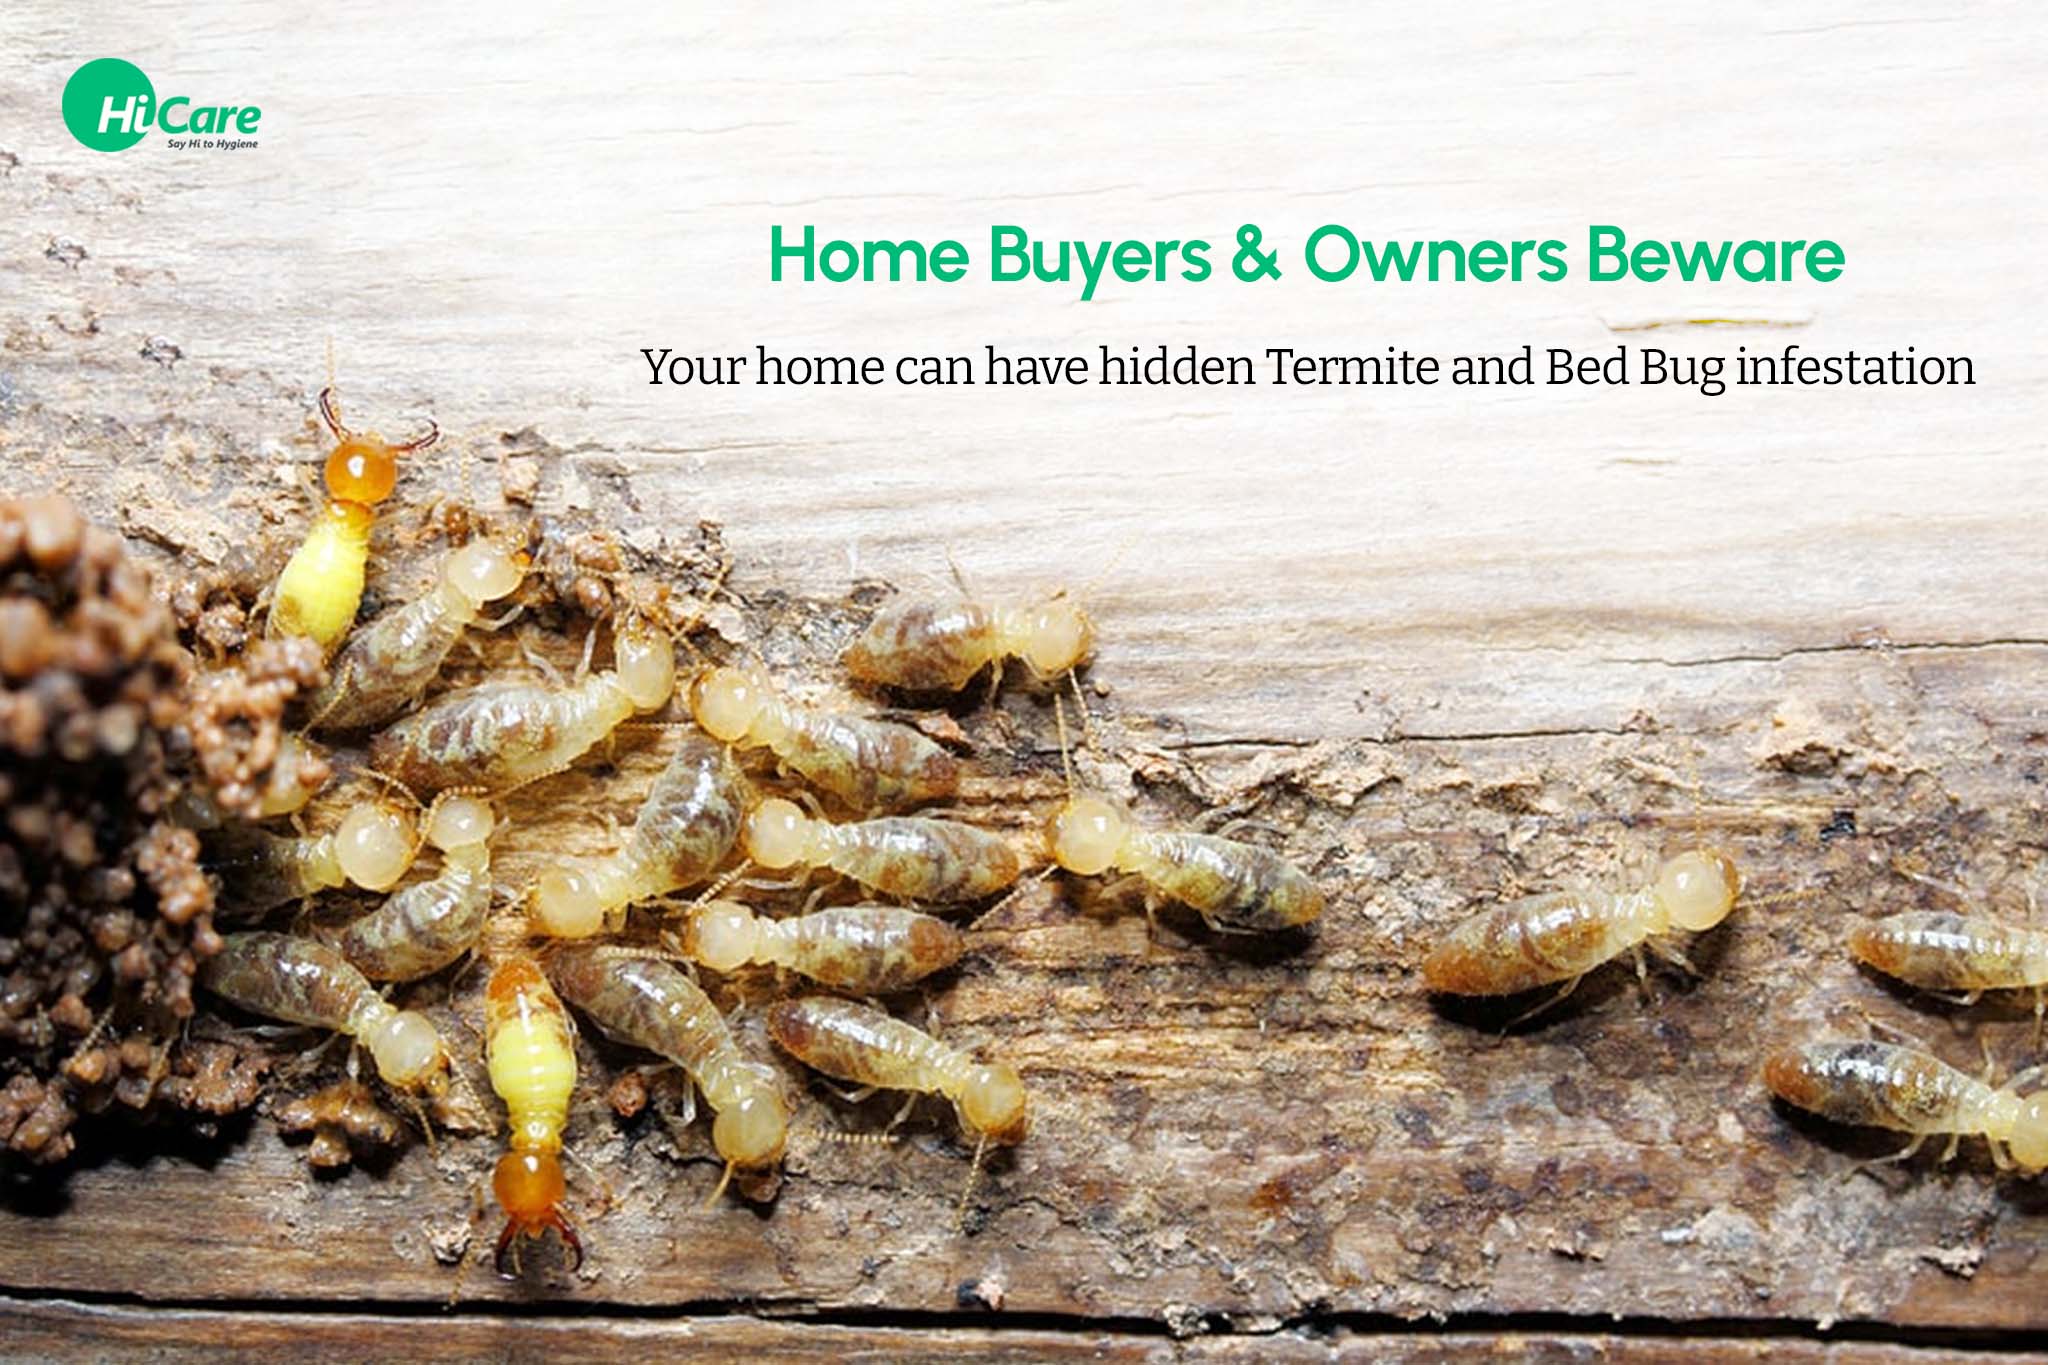 advice for home buyers and owners on termites and bed bugs